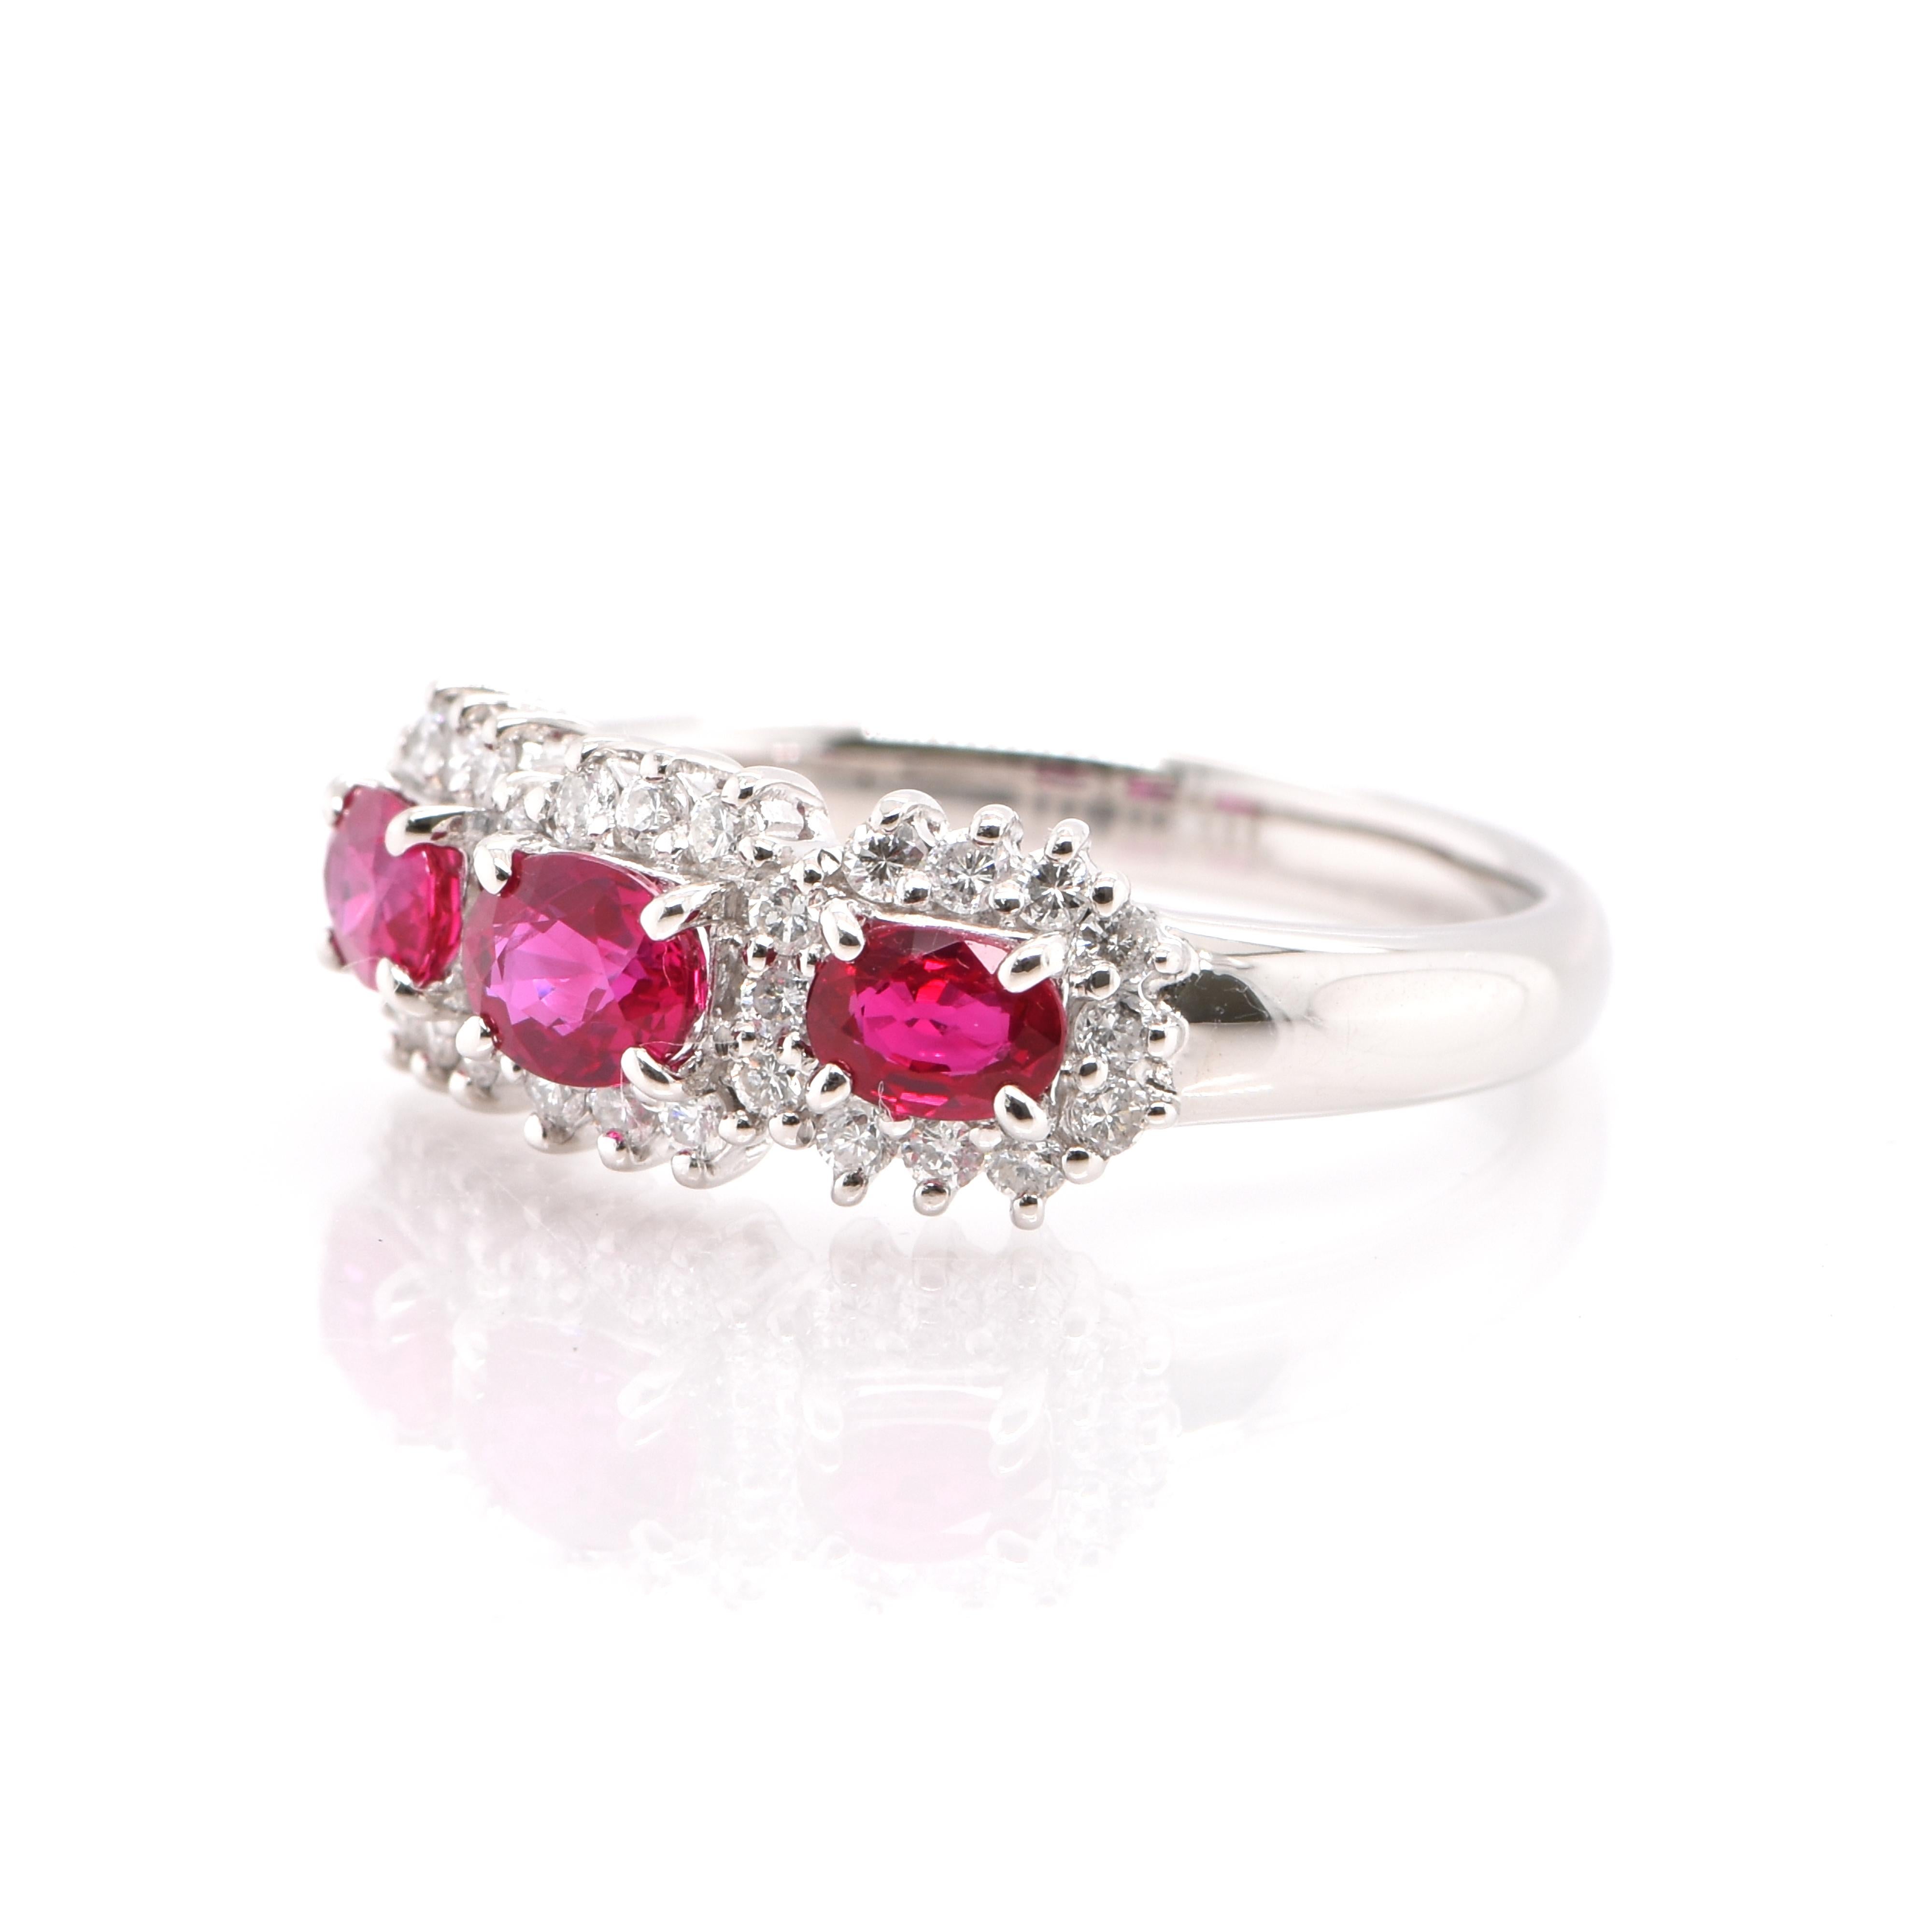 A beautiful Band Ring featuring a a total of 0.87 Carats of Natural, Ruby and 0.27 Carats of Diamond Accents set in Platinum. Rubies are referred to as 